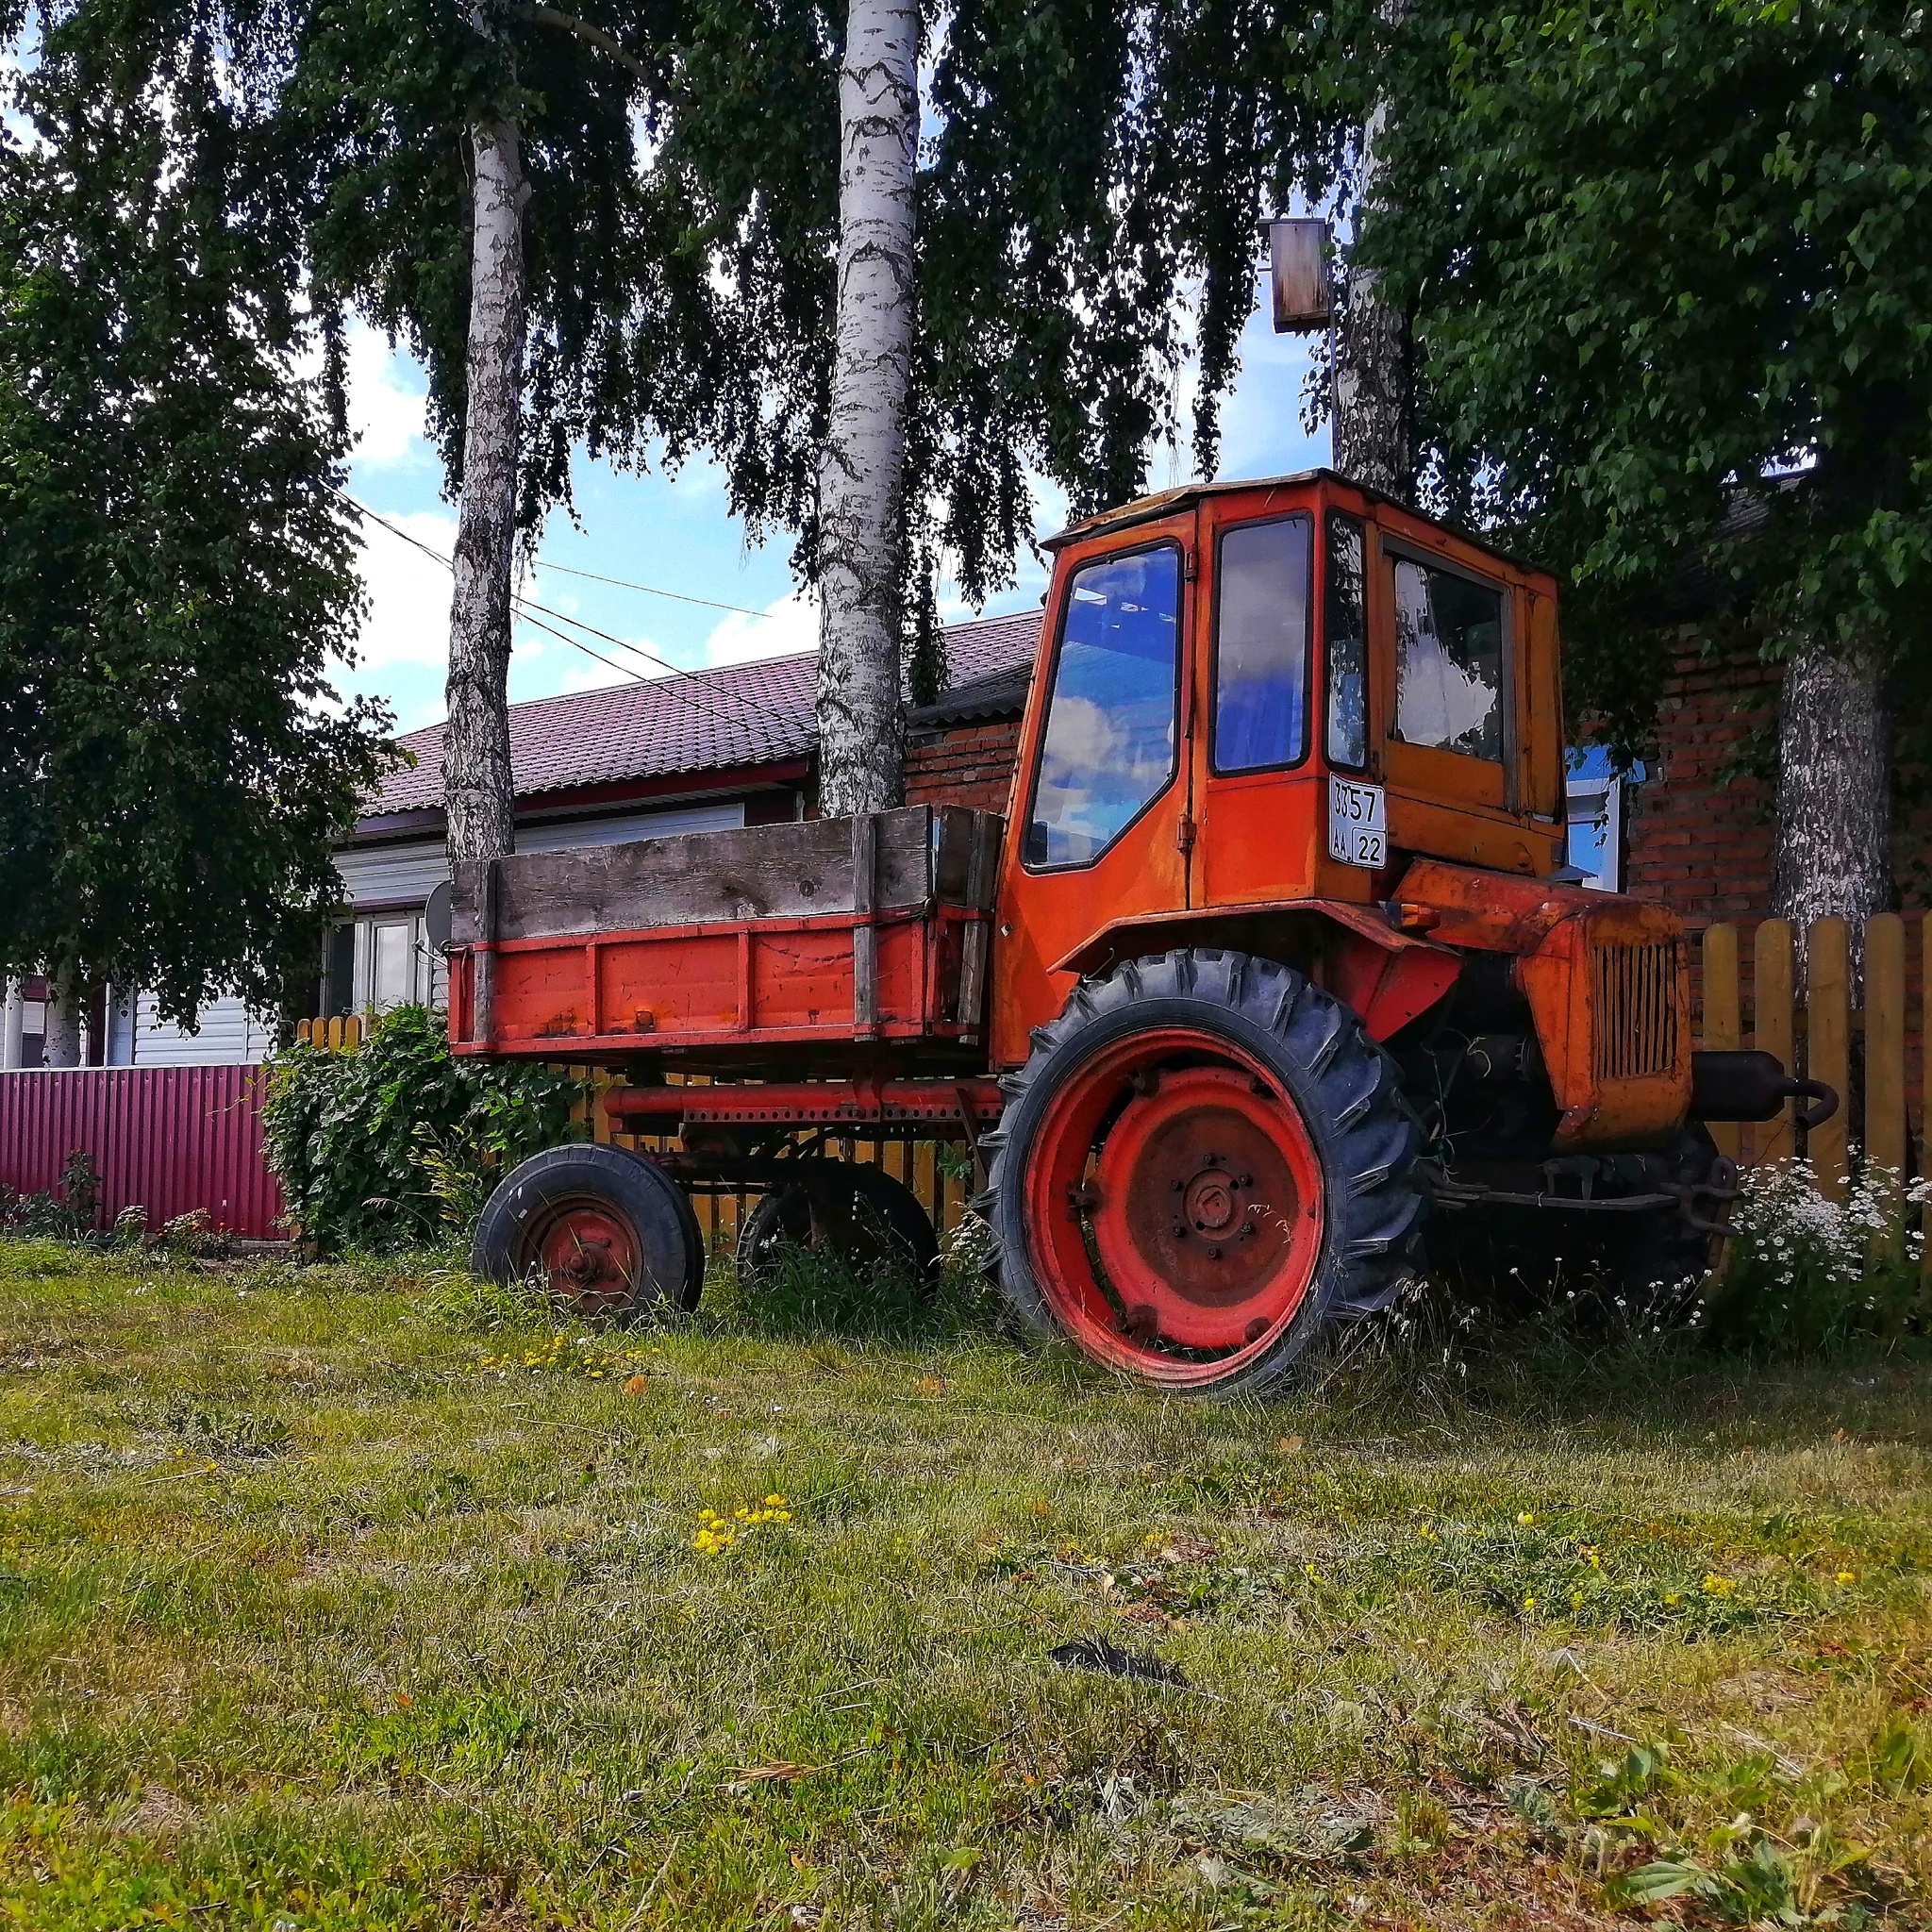 Reply to What are you? - My, Auto, Tractor, Technics, Mobile photography, Reply to post